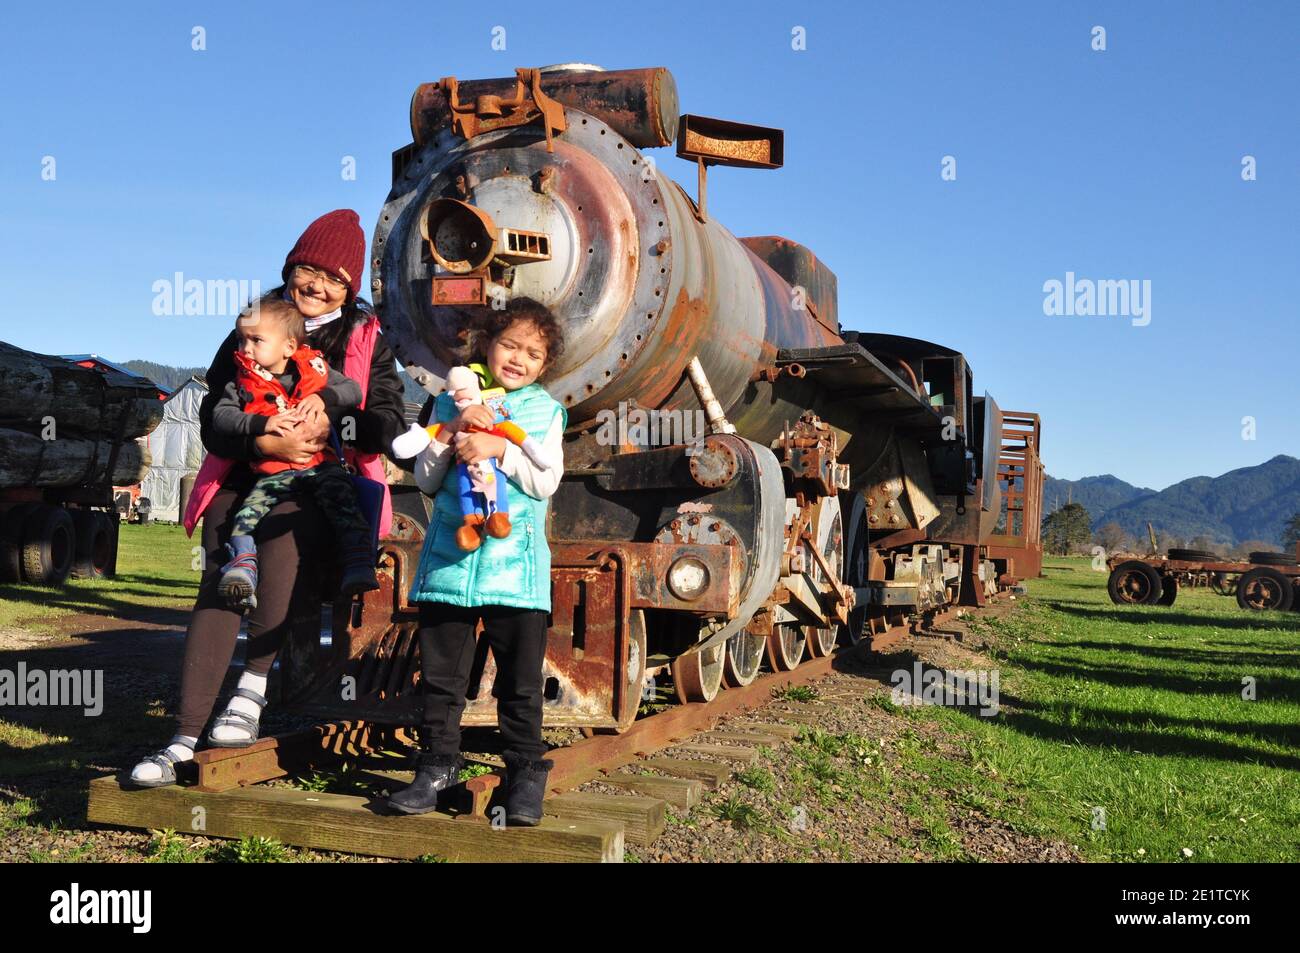 Family standing in front of an old vintage steam powered train Stock Photo